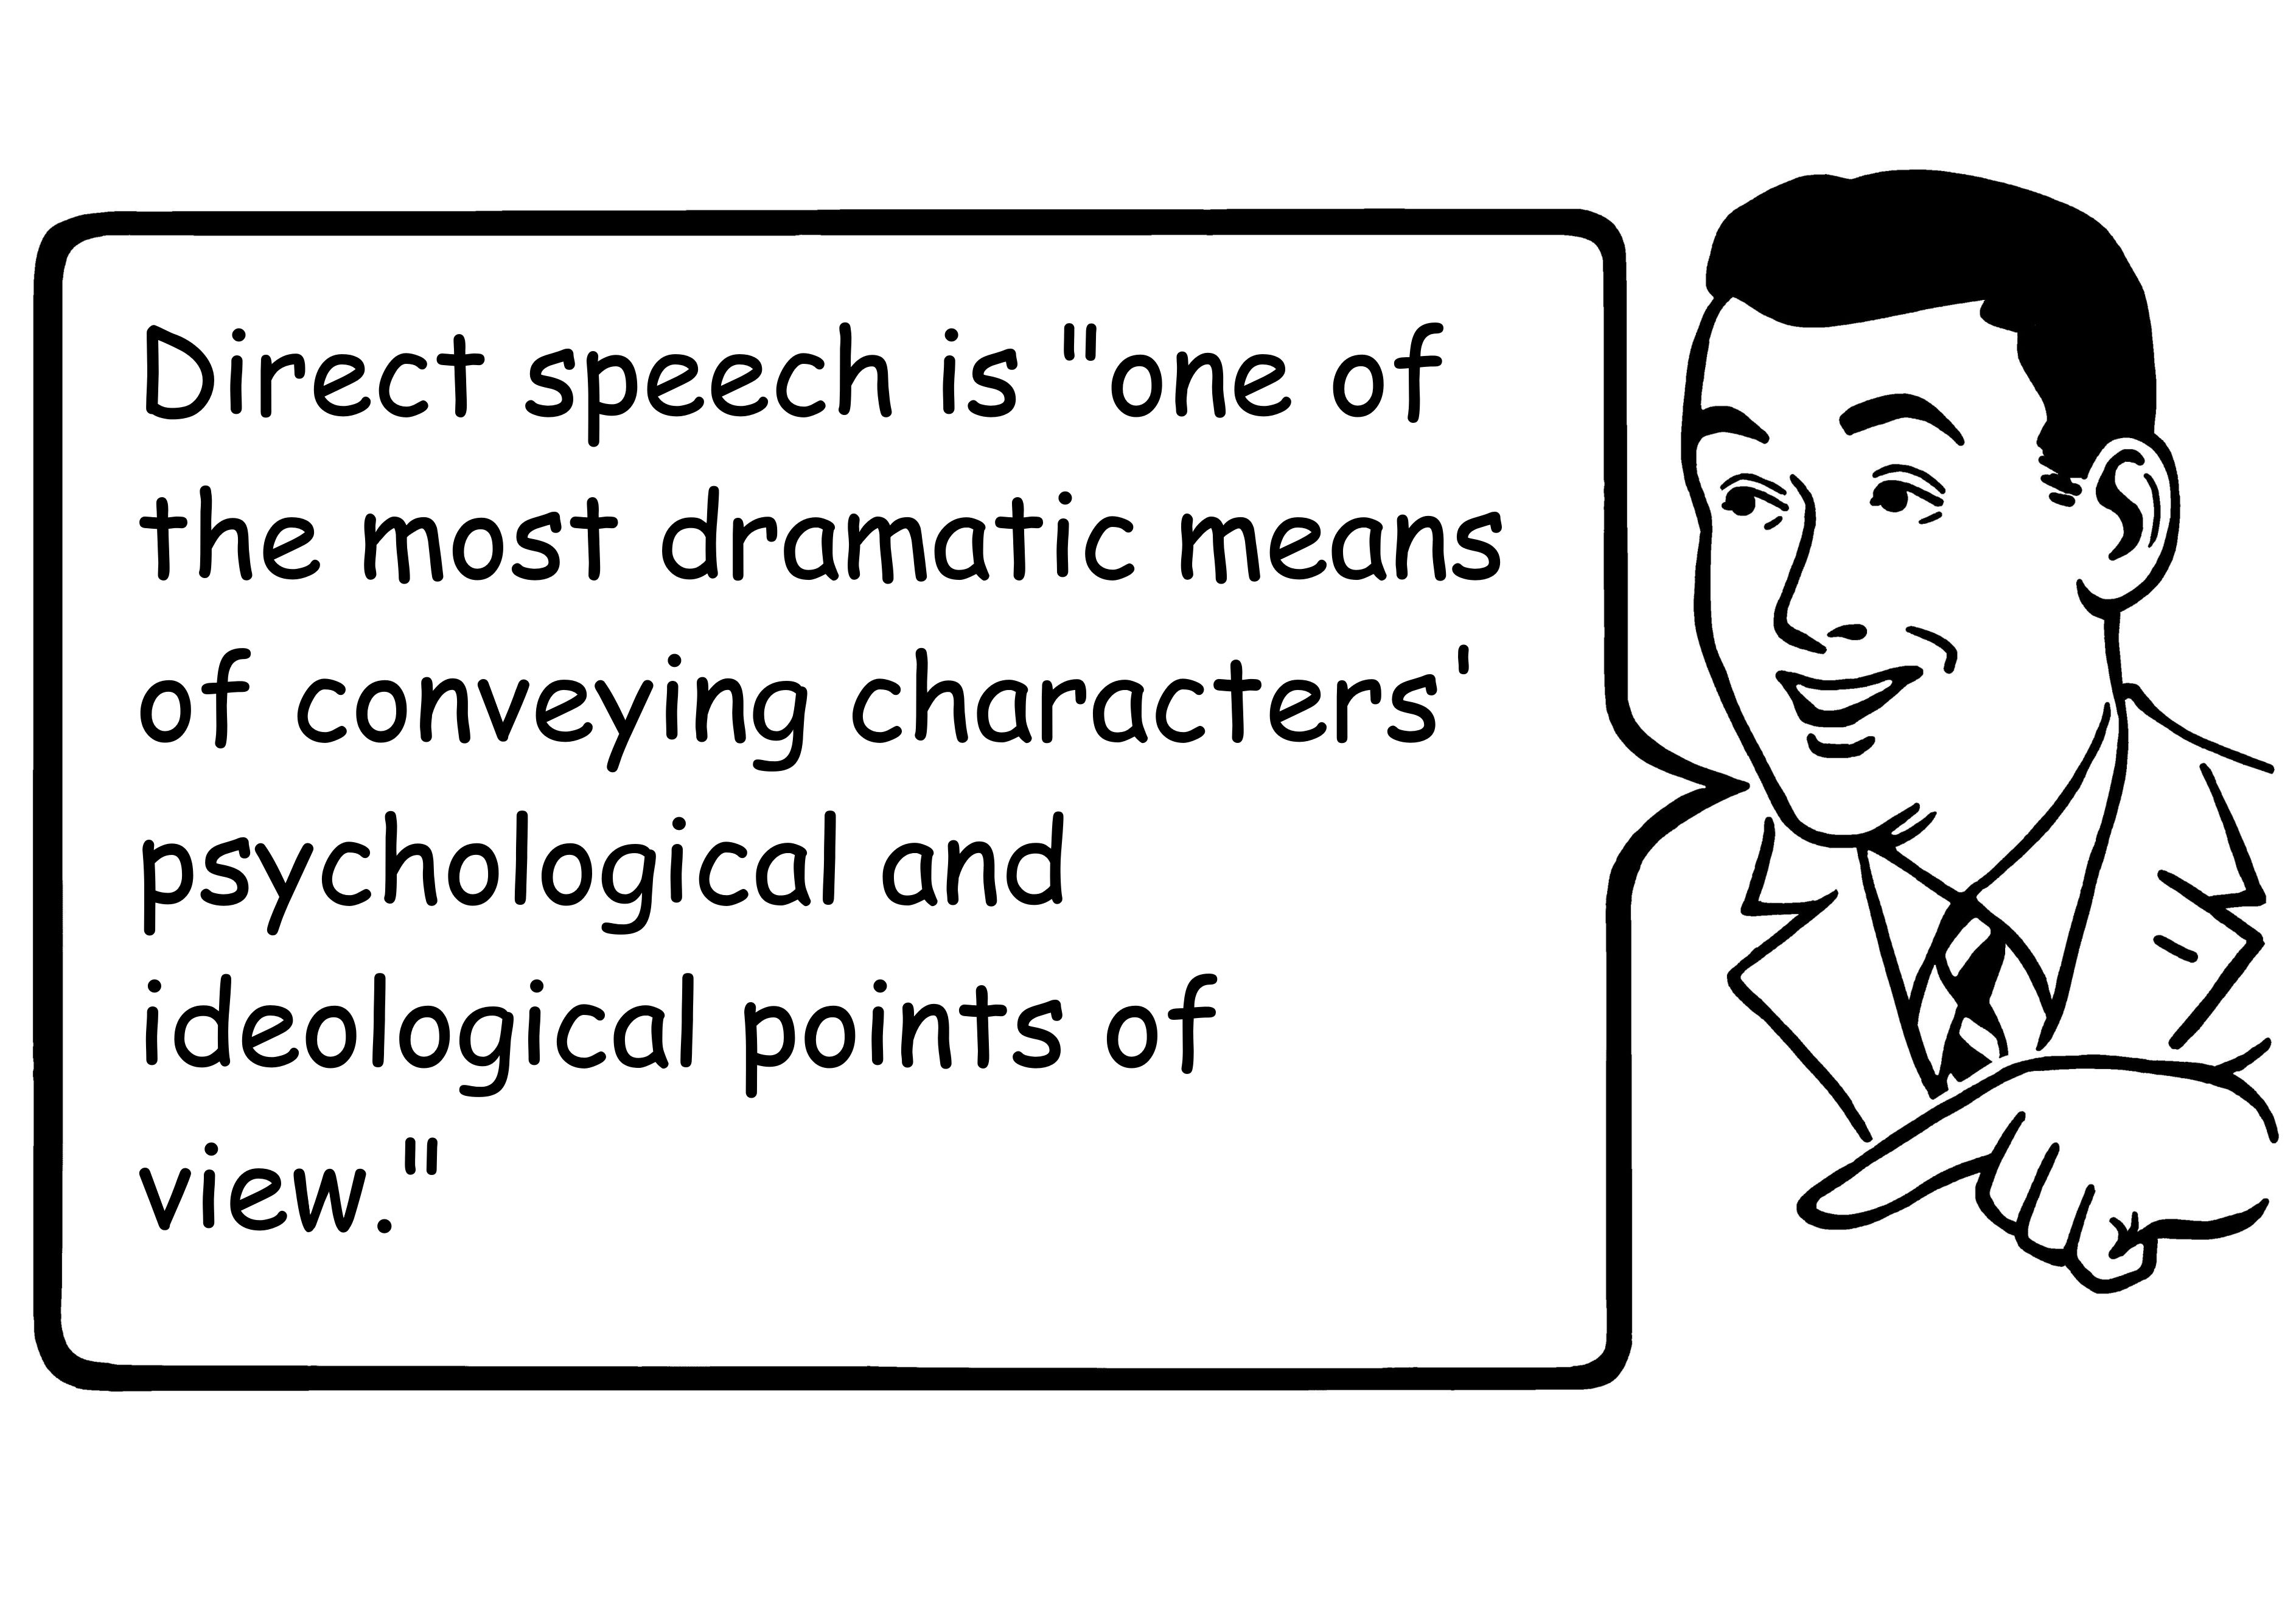 meaning of direct speech and examples